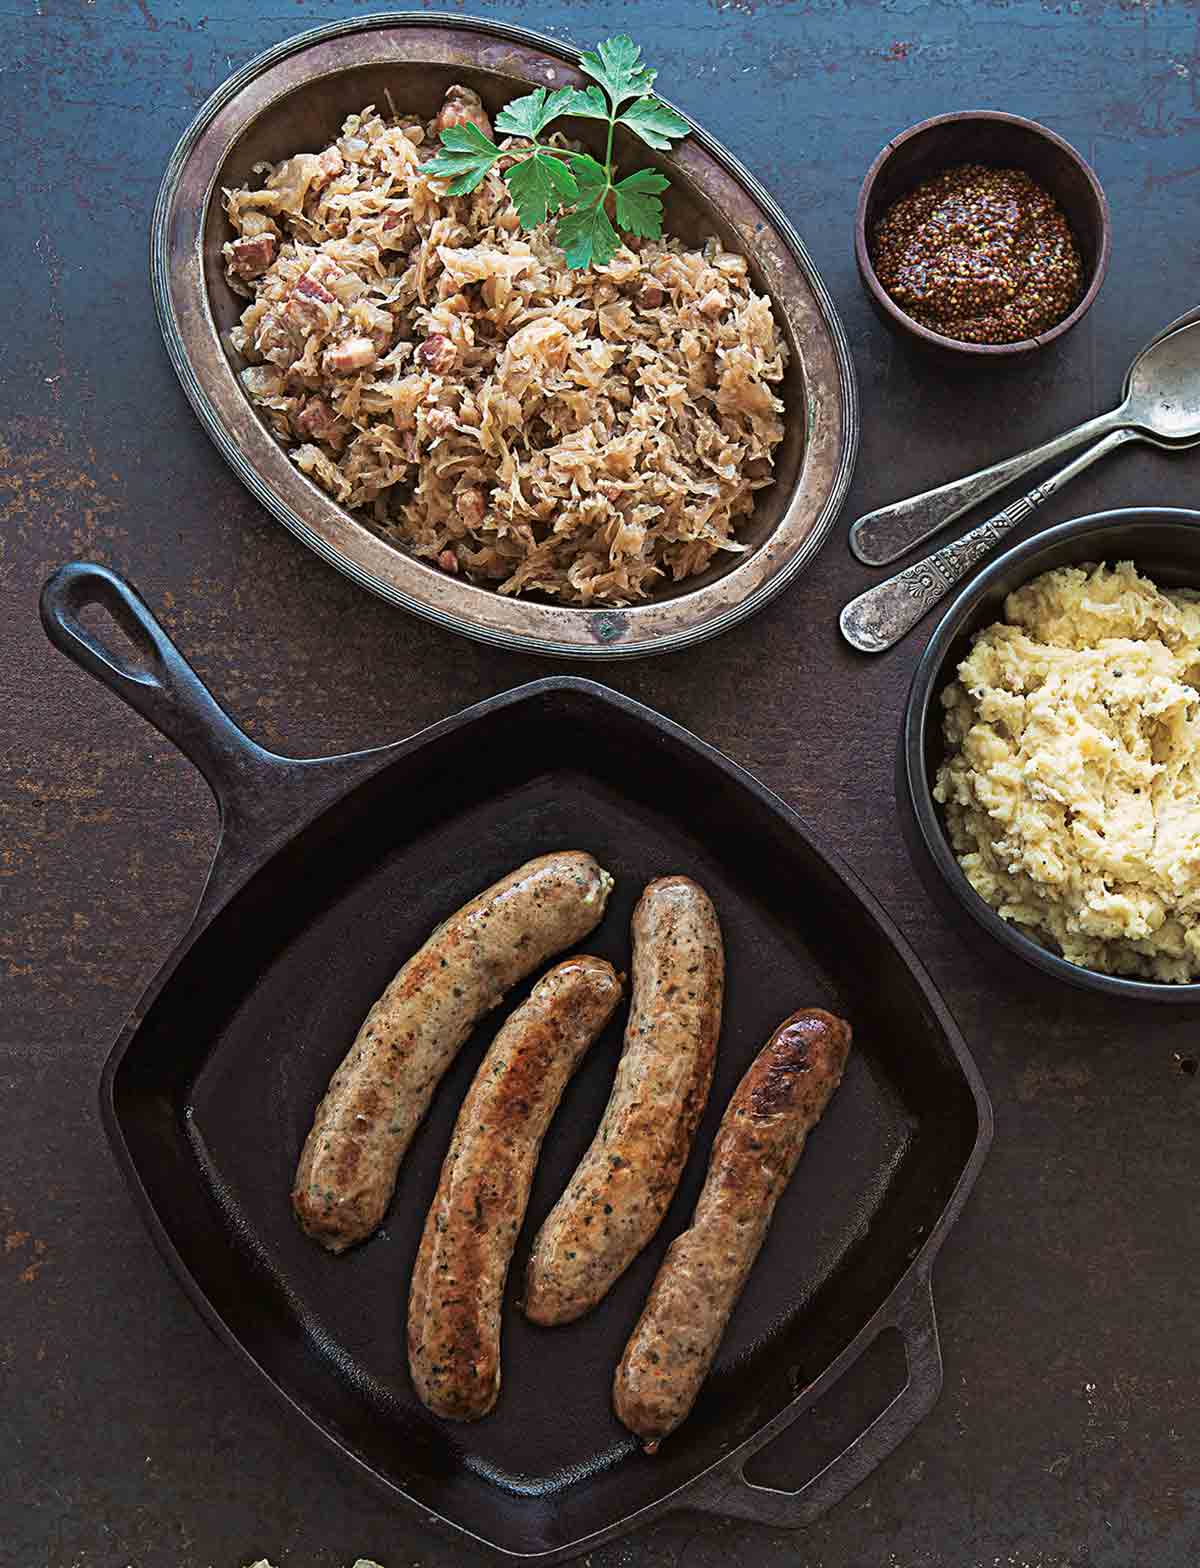 Four cooked bratwurst and sauerkraut, along with mashed potatoes and grainy mustard in separate dishes beside the skillet containing the bratwurst.